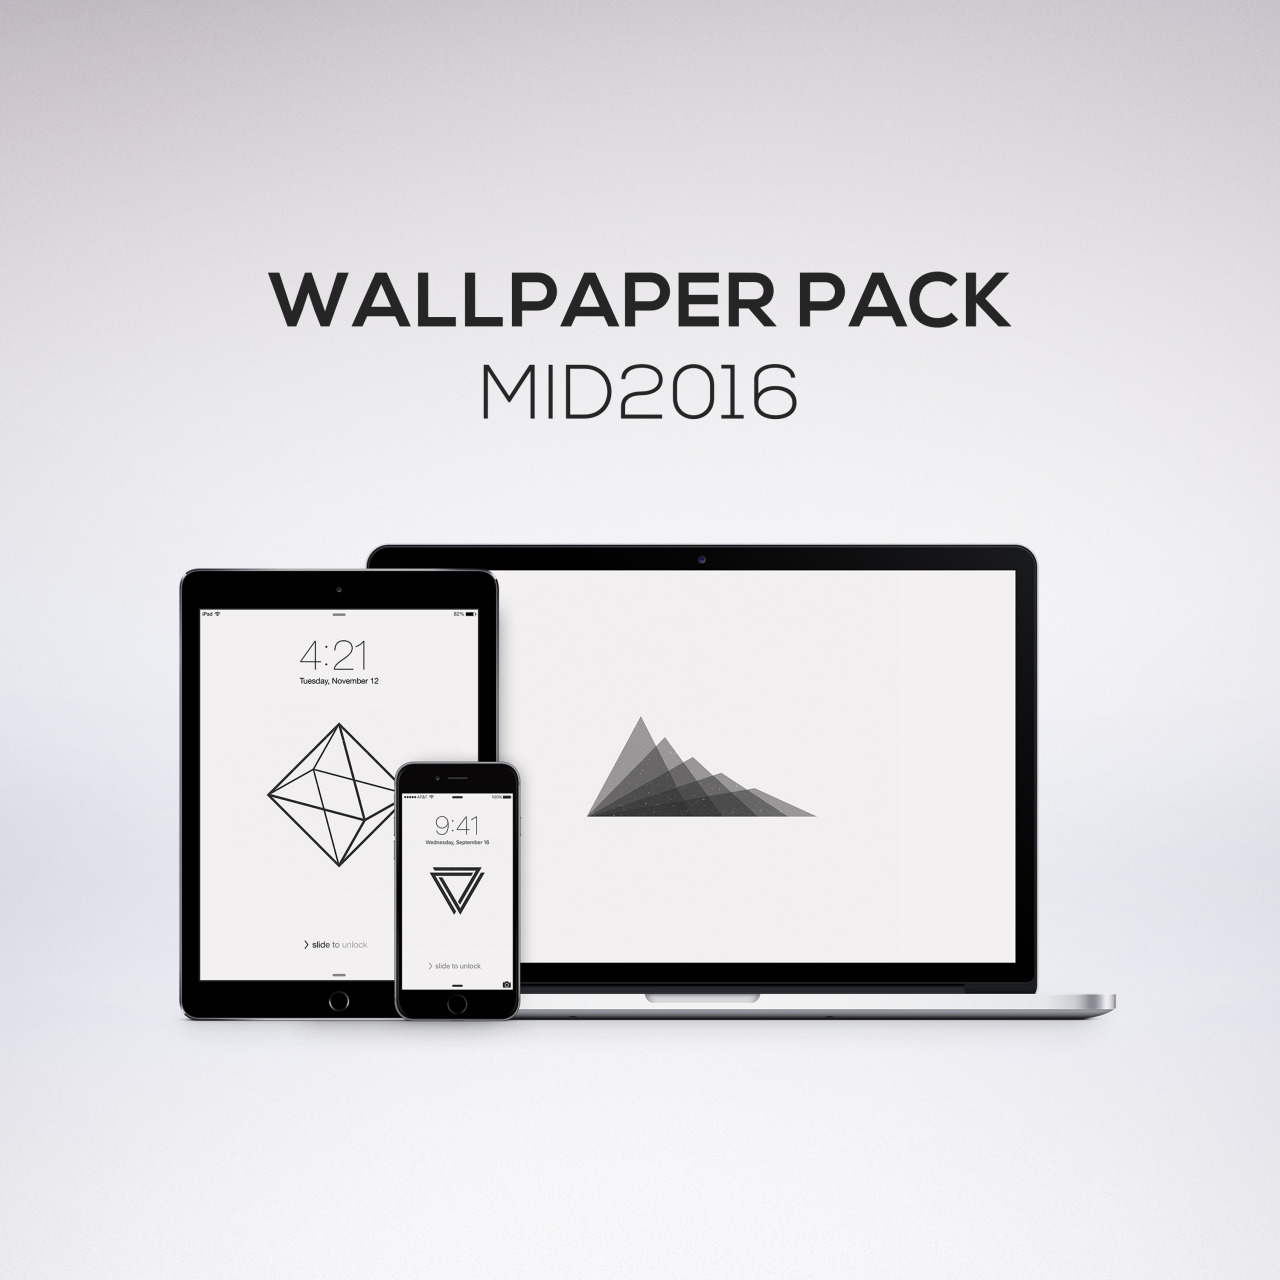 Wallpaper Pack Mid2016
13 New Wallpapers Now Available - Daily Minimal Wallpaper Pack - HD Wallpaper 